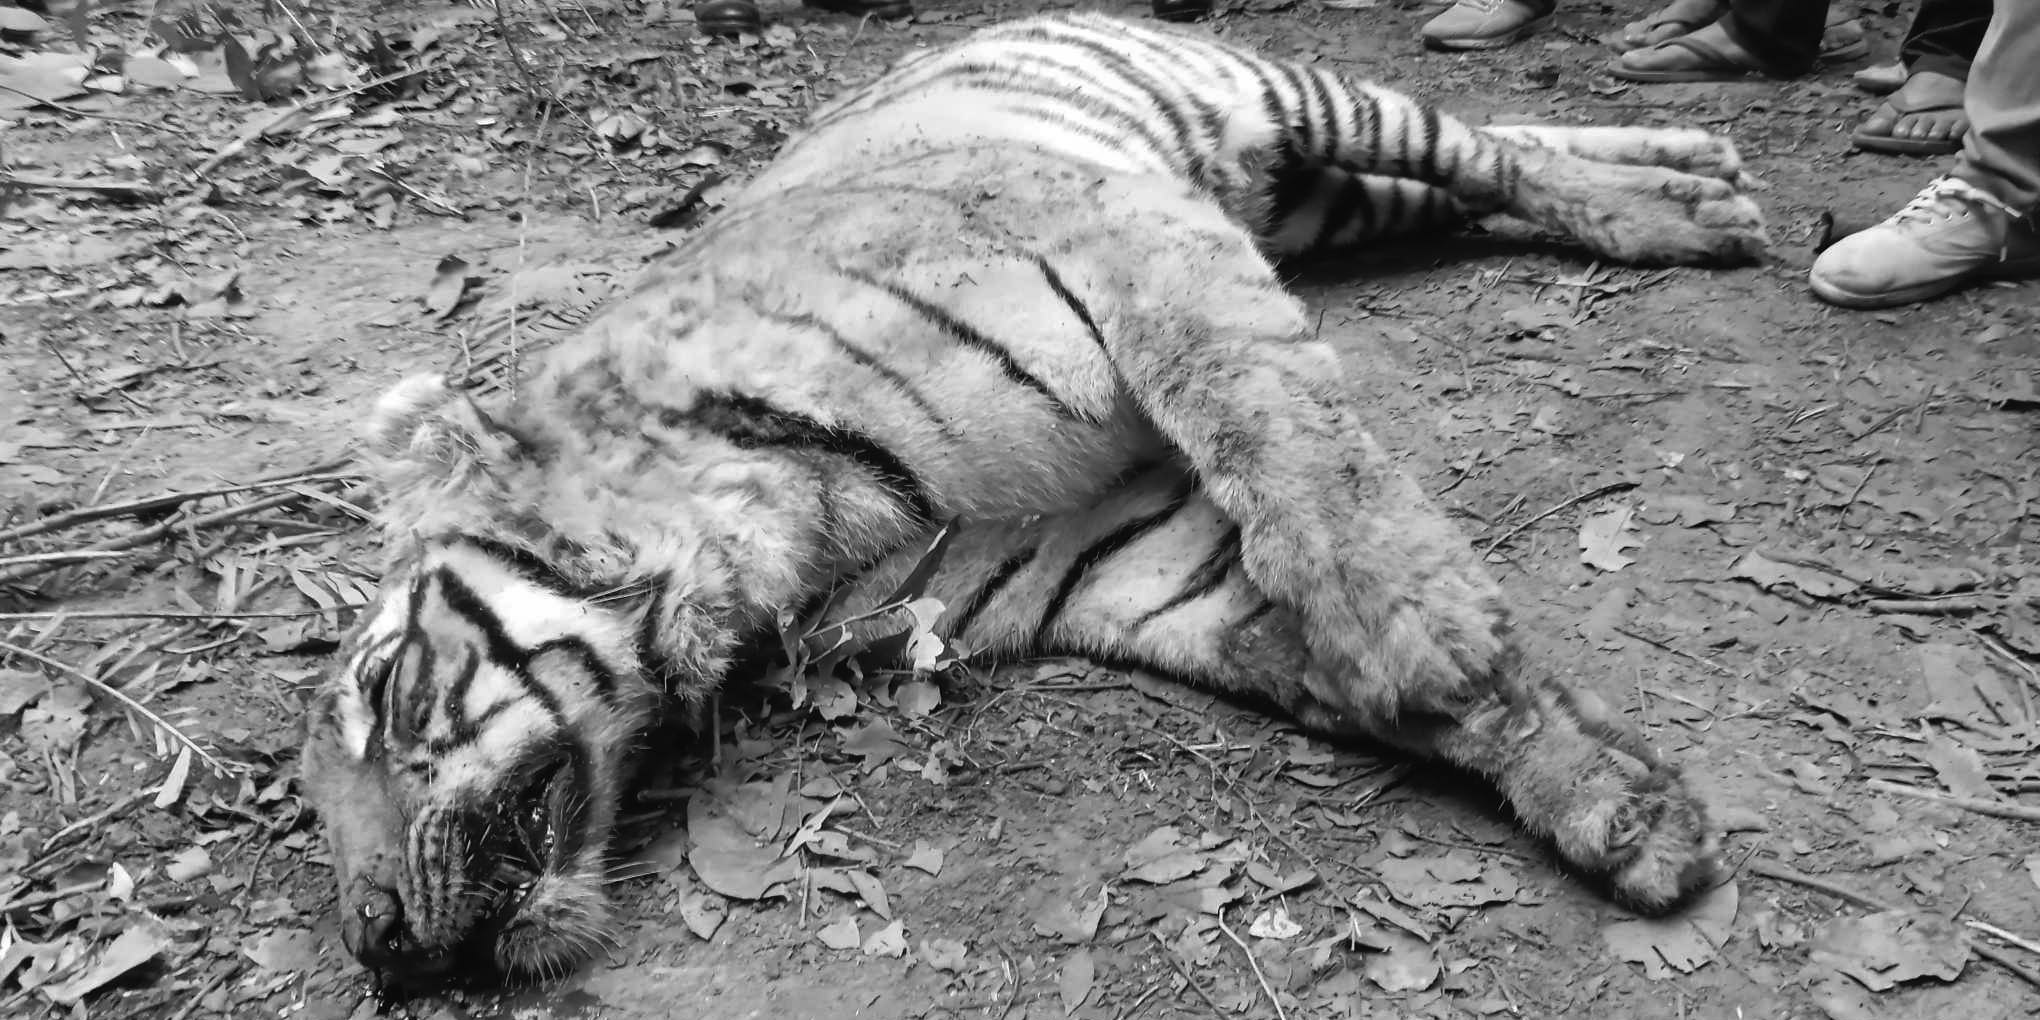 Royal Bengal tiger found dead in Kailali